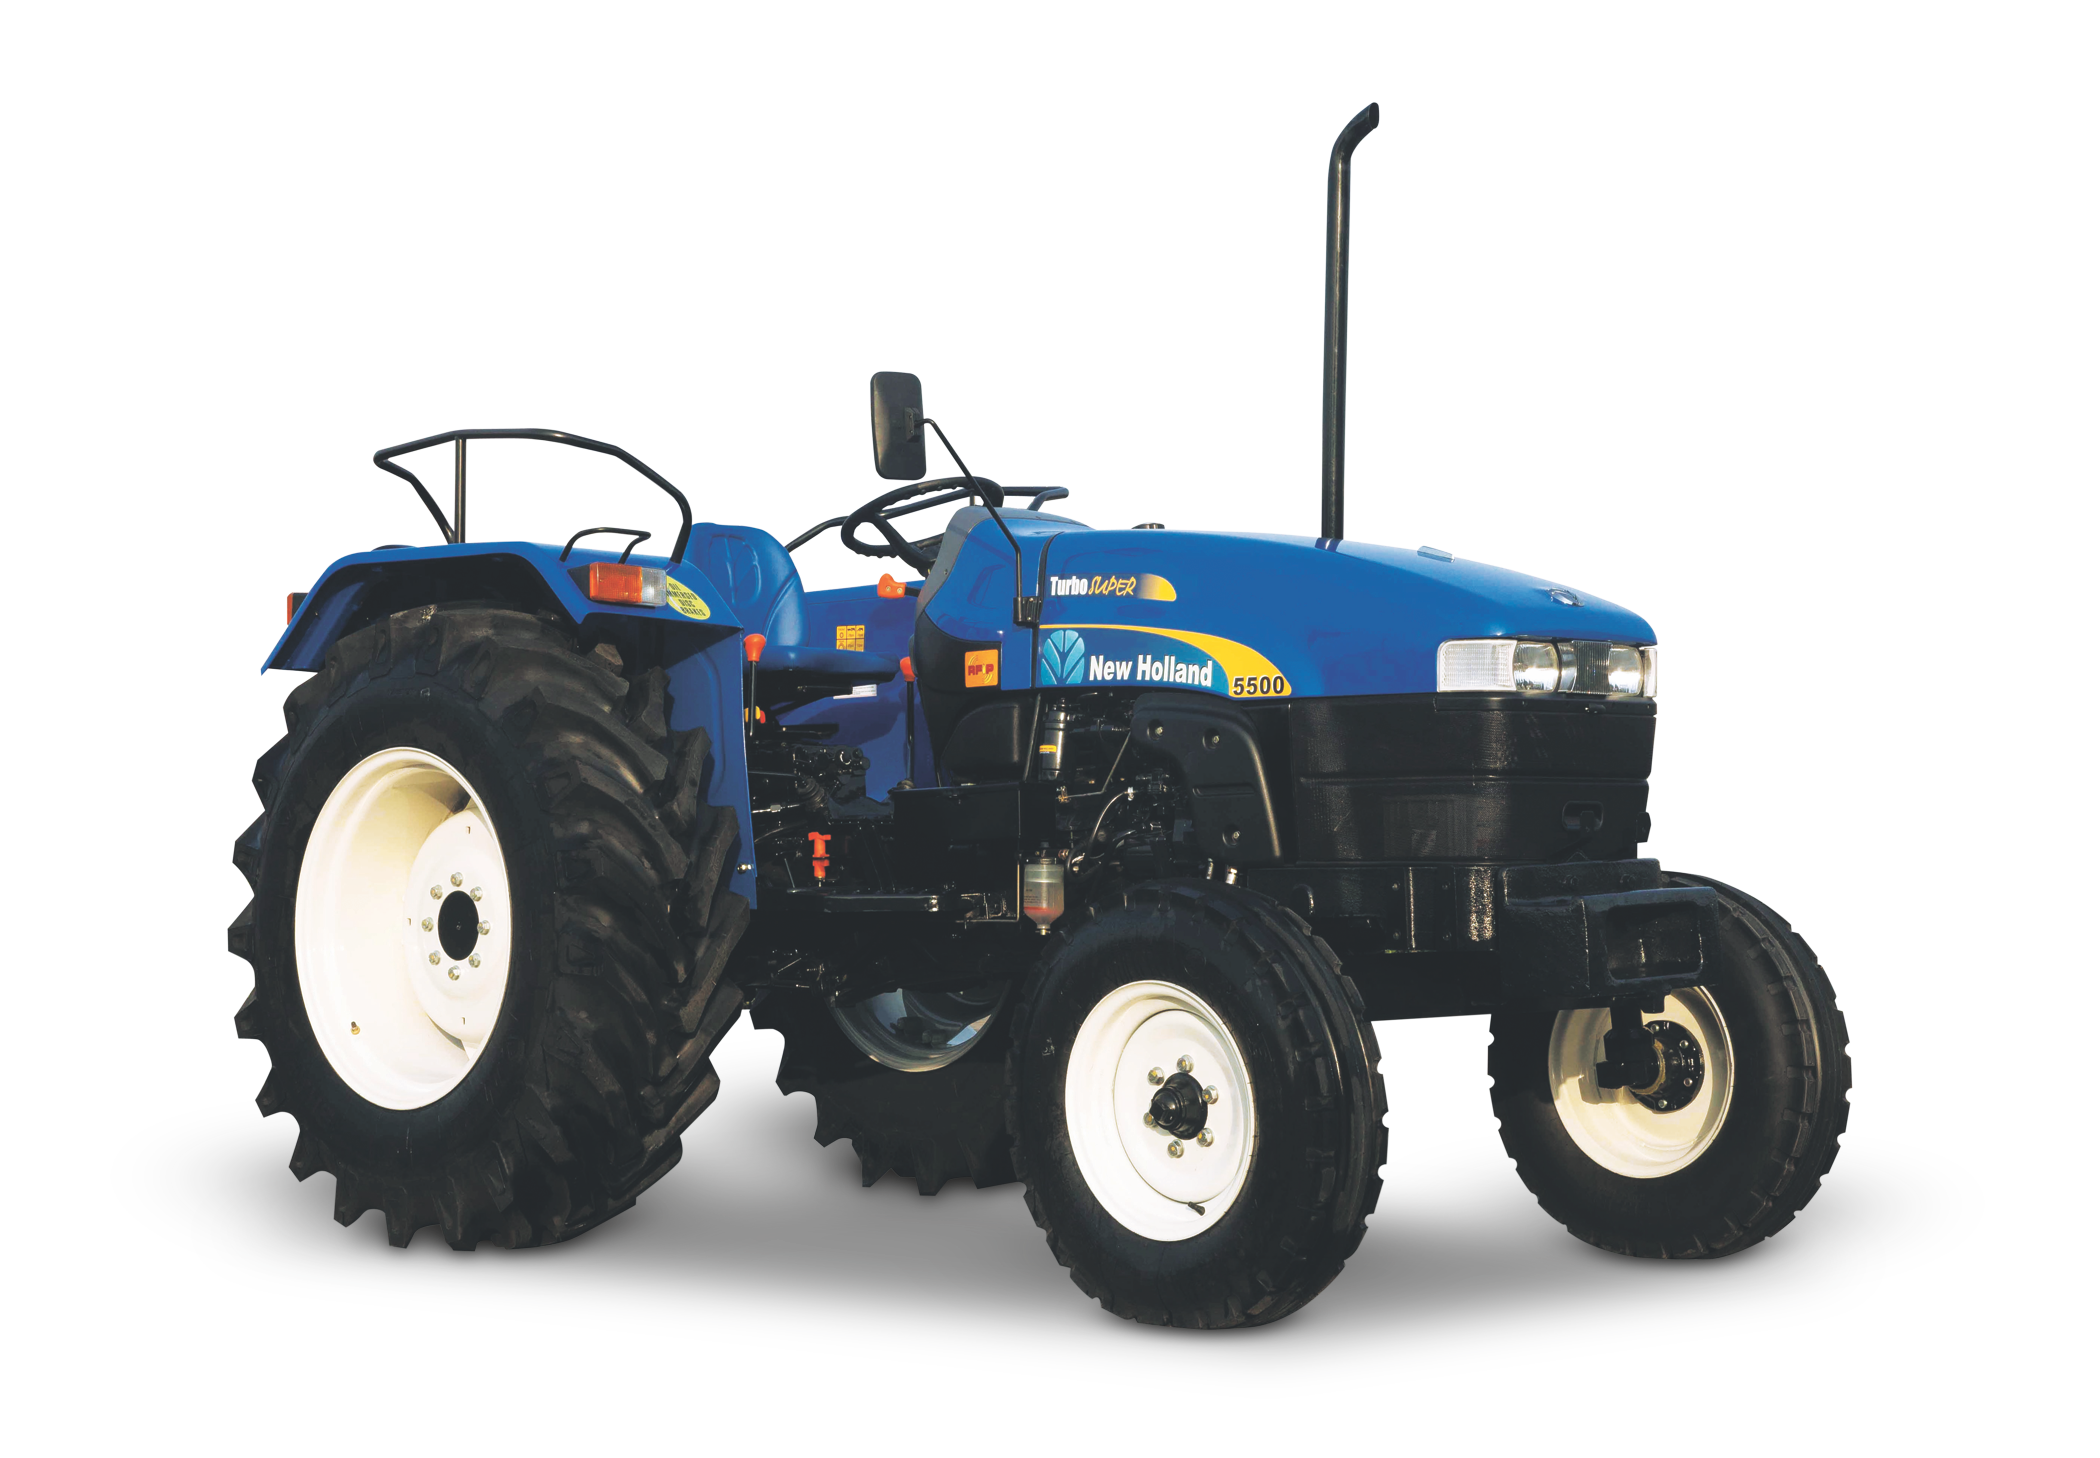 New Holland Tractor wallpapers, Vehicles, HQ New Holland ...